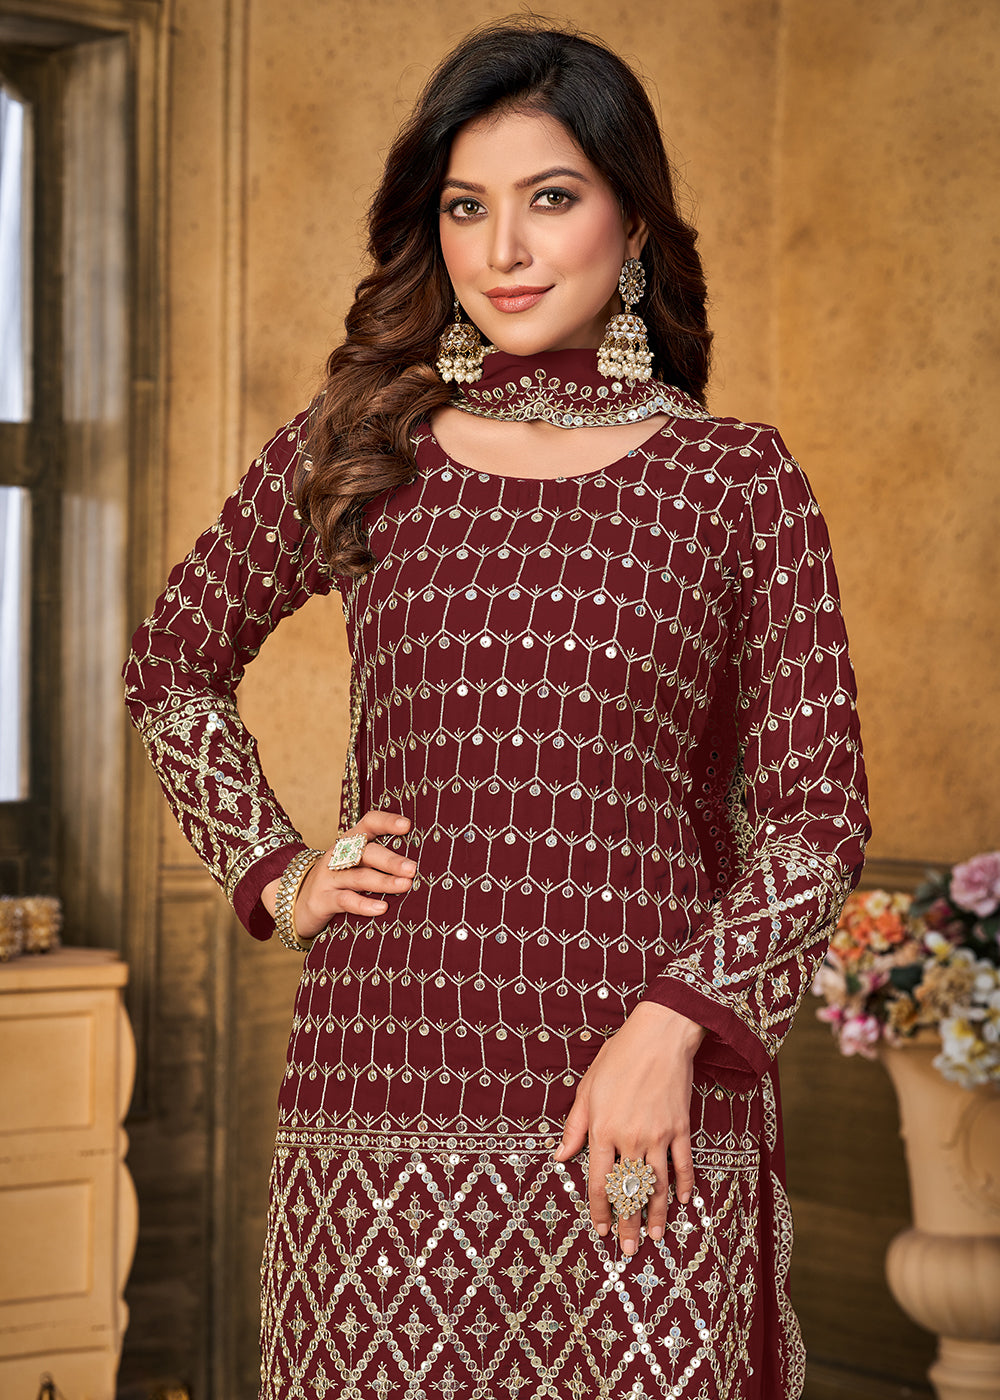 Maroon Indian Gowns - Buy Indian Gown online at Clothsvilla.com